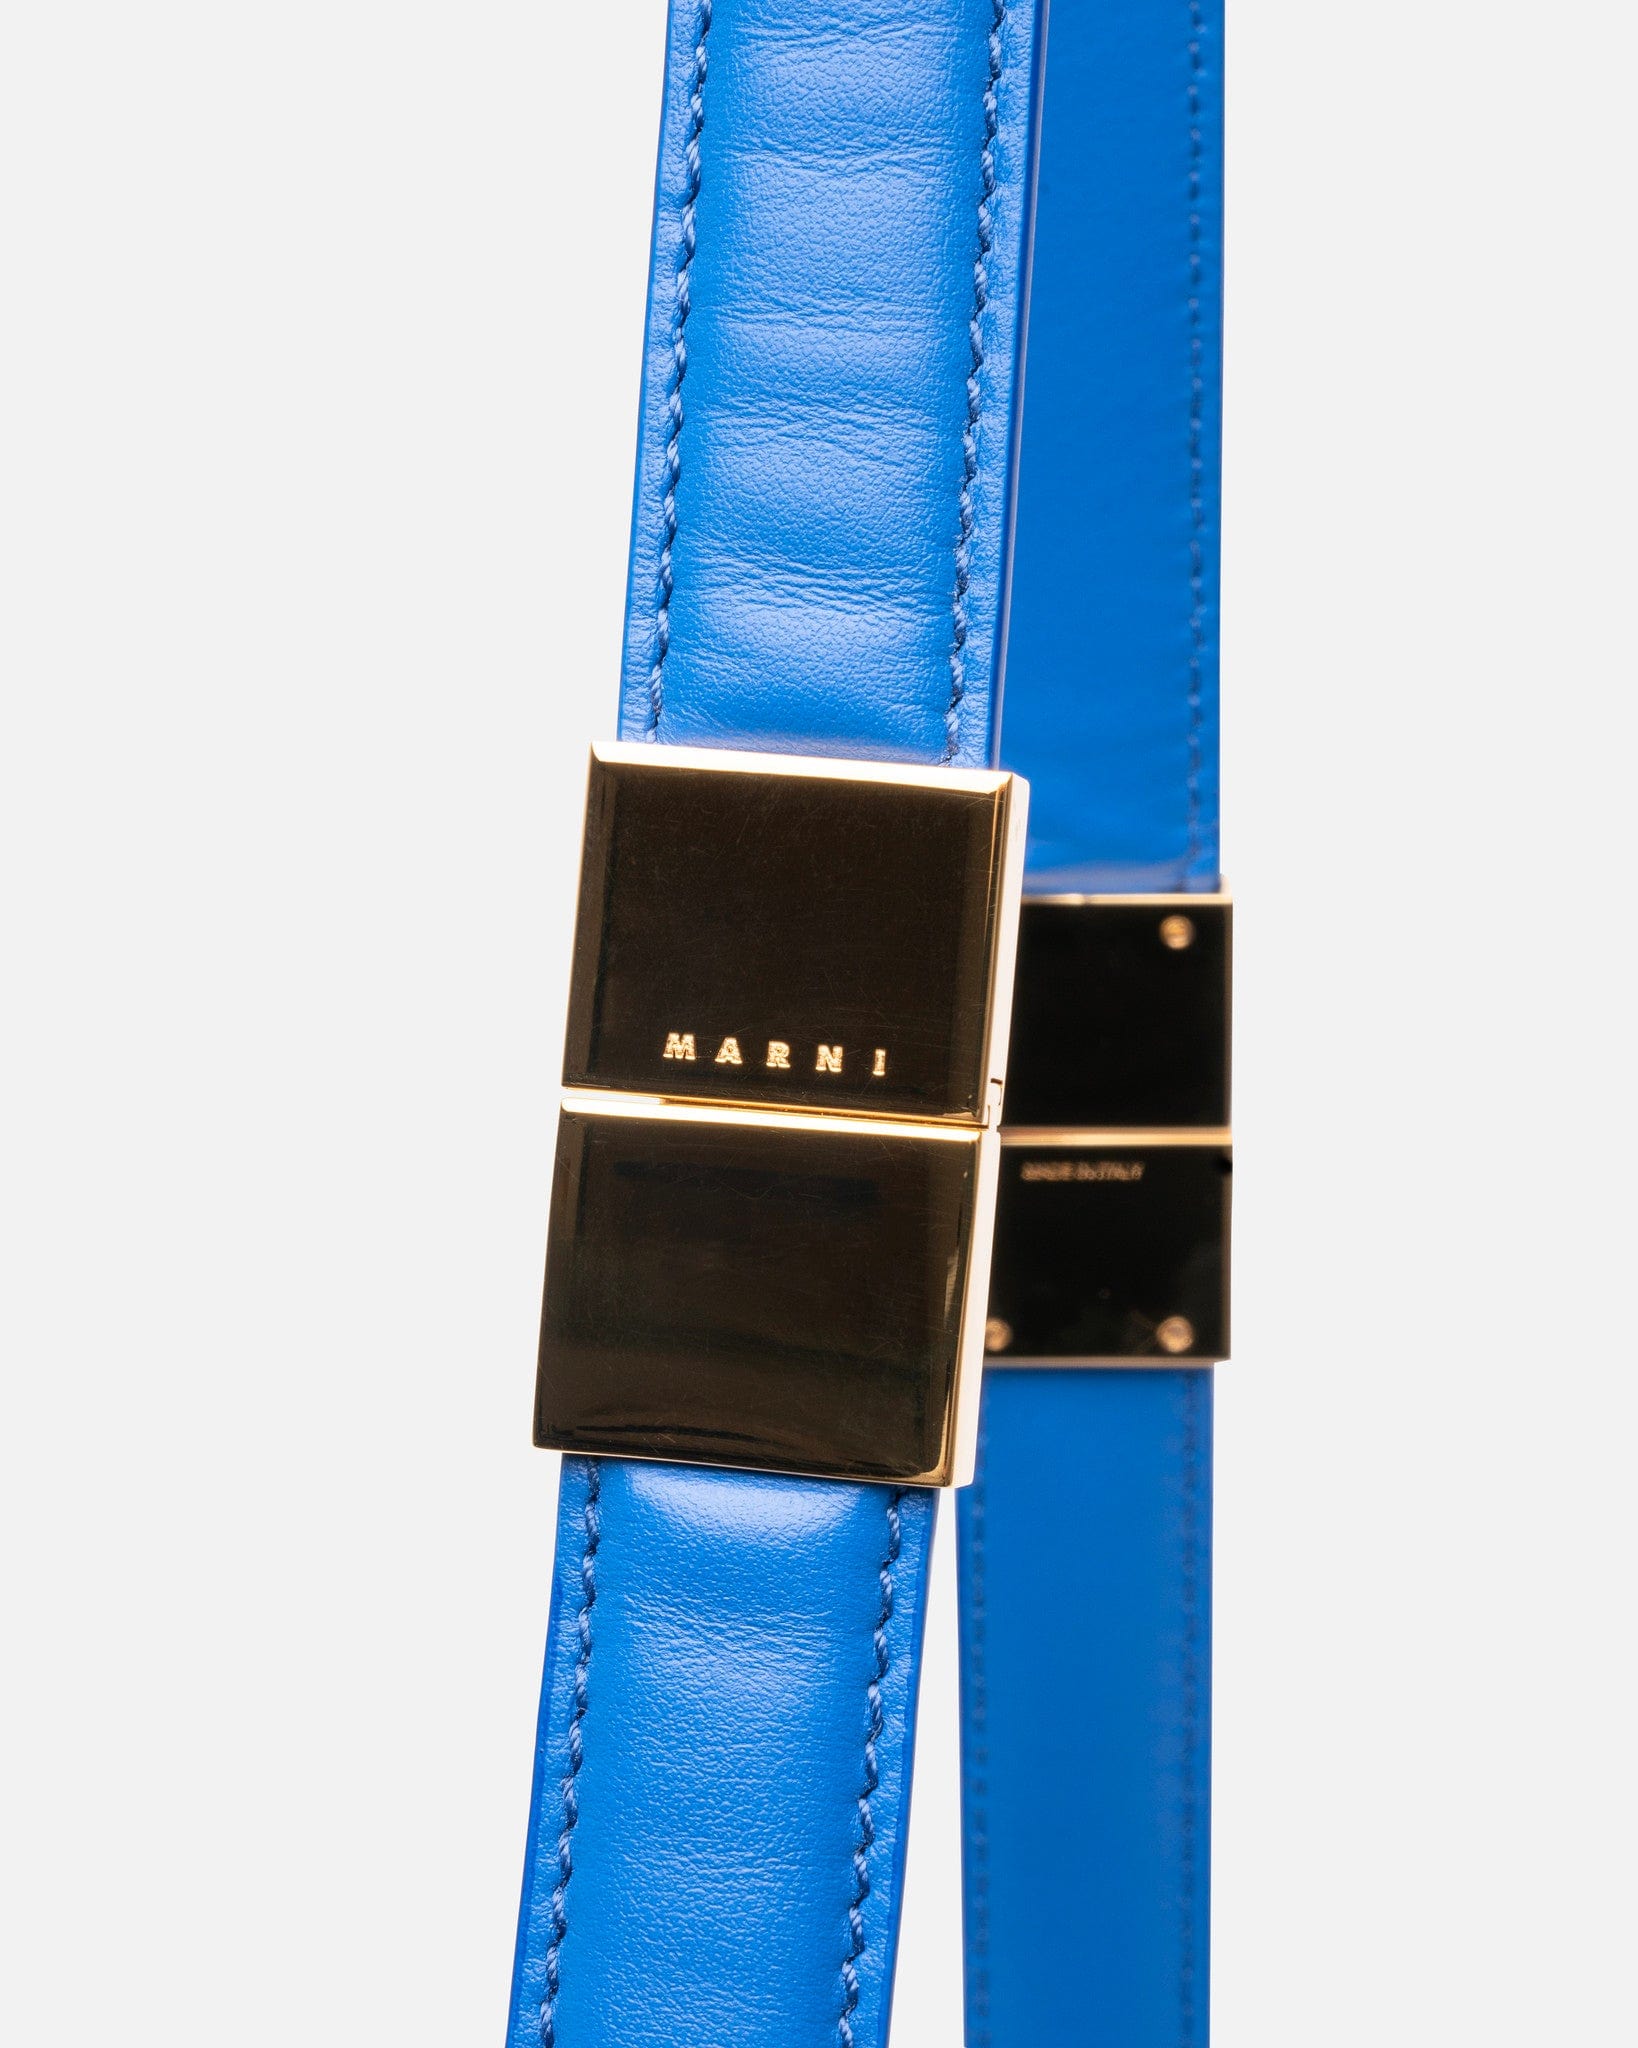 Marni Women Bags Small Prism Bag in Astra Blue